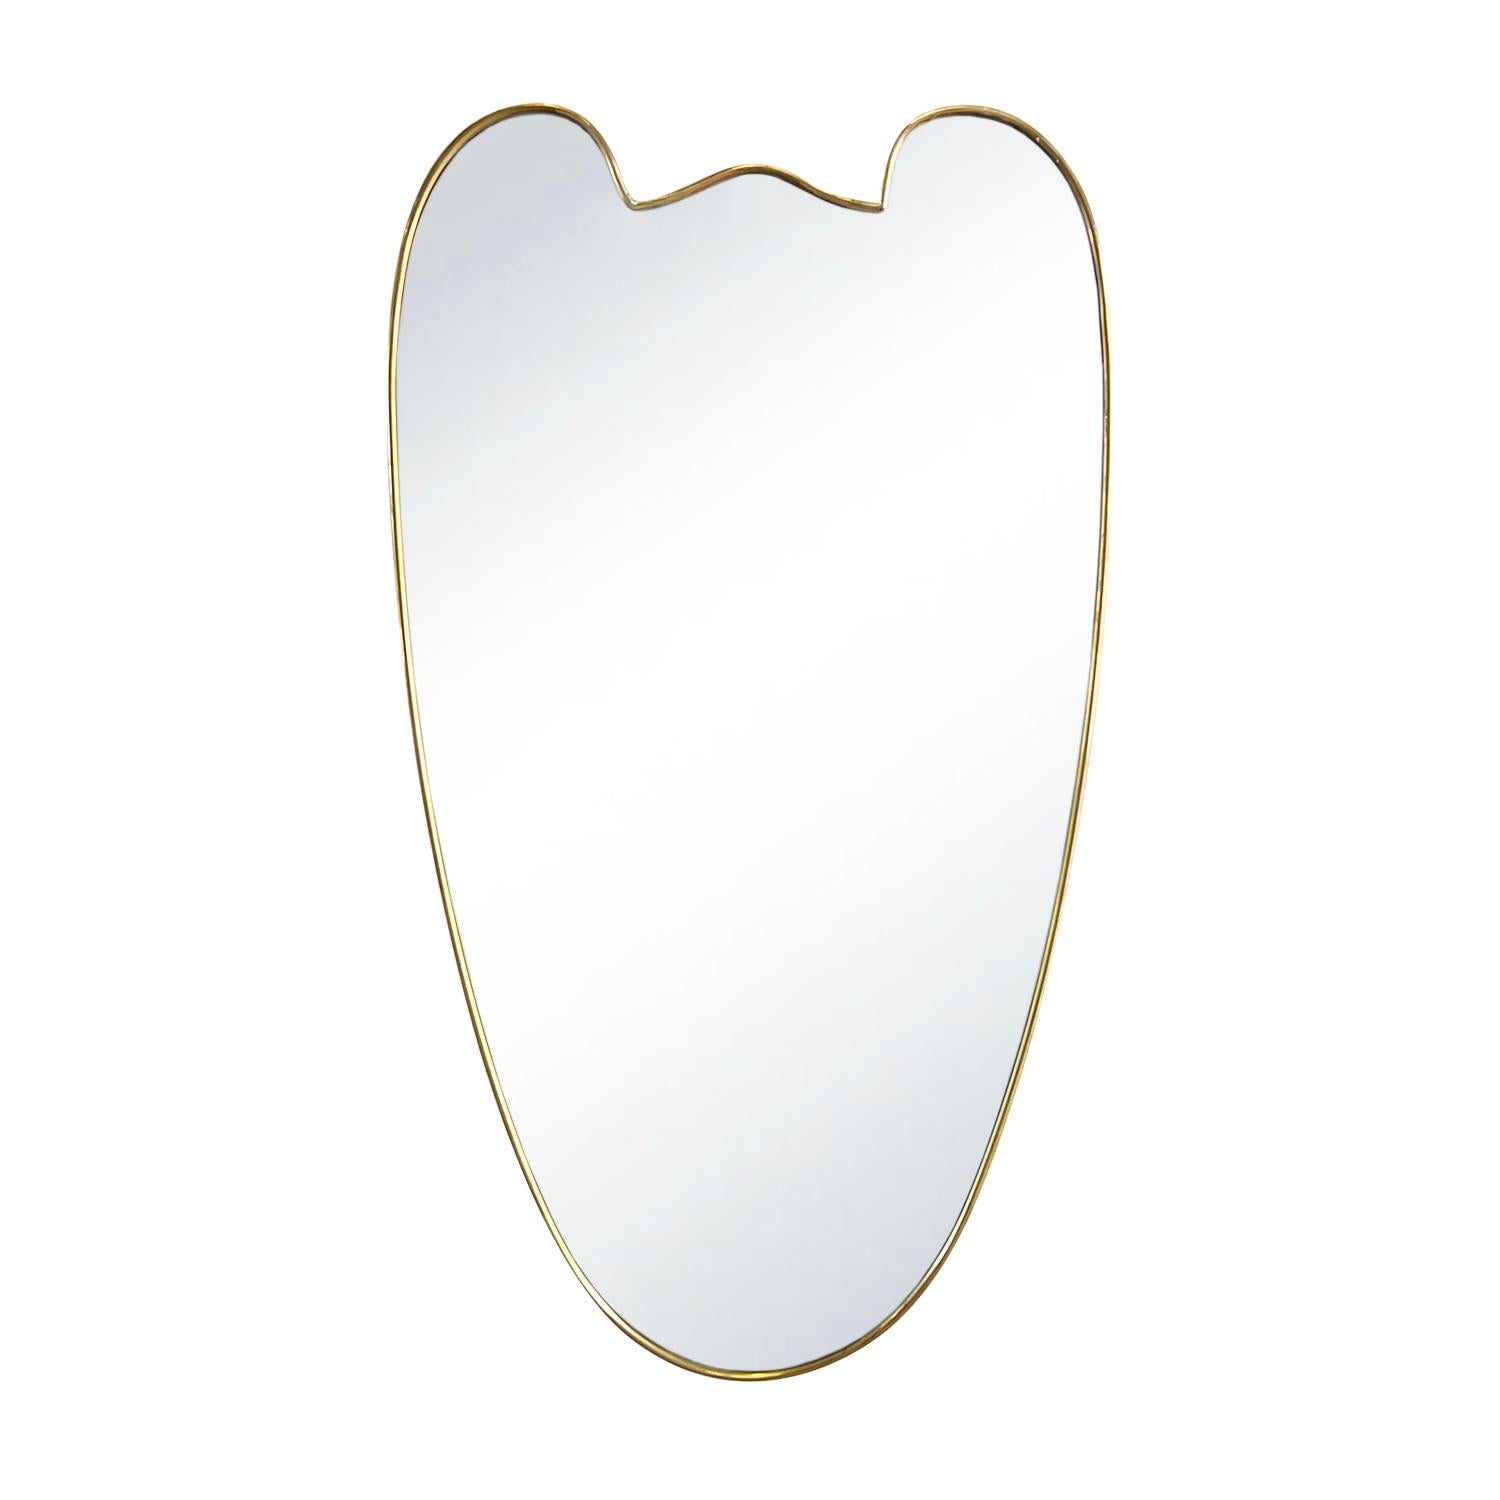 An oval, sculptural vintage Mid-Century modern Italian wall mirror made of hand crafted polished brass in good condition. The modernist mirror is consisting its original mirrored glass. Wear consistent with age and use. Circa 1950 - 1960, Italy.